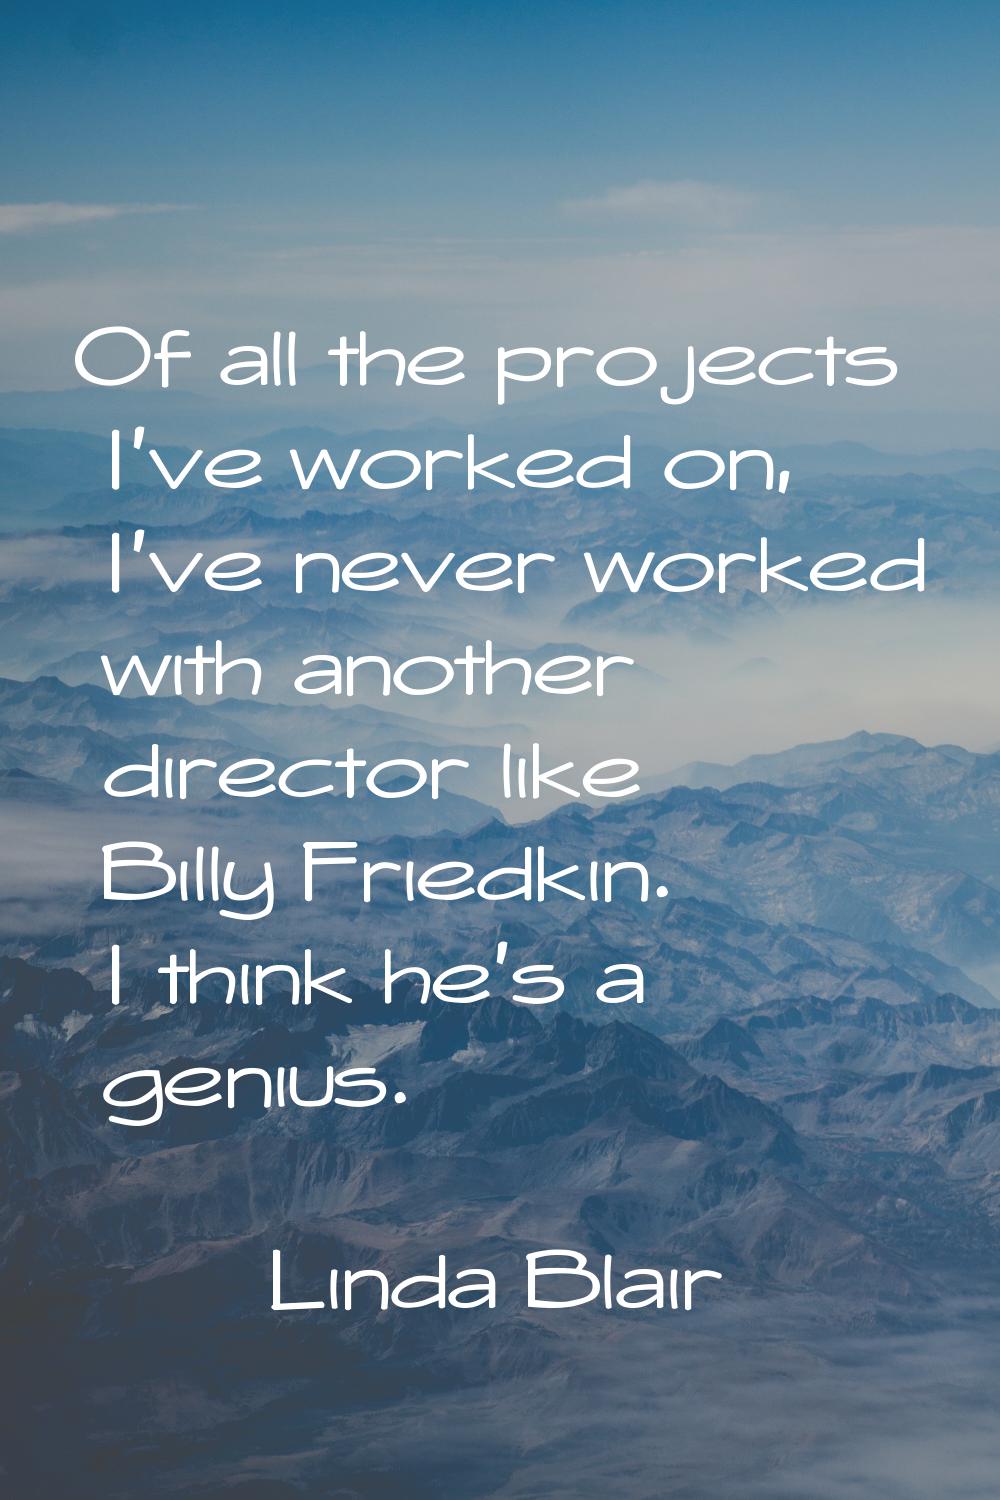 Of all the projects I've worked on, I've never worked with another director like Billy Friedkin. I 